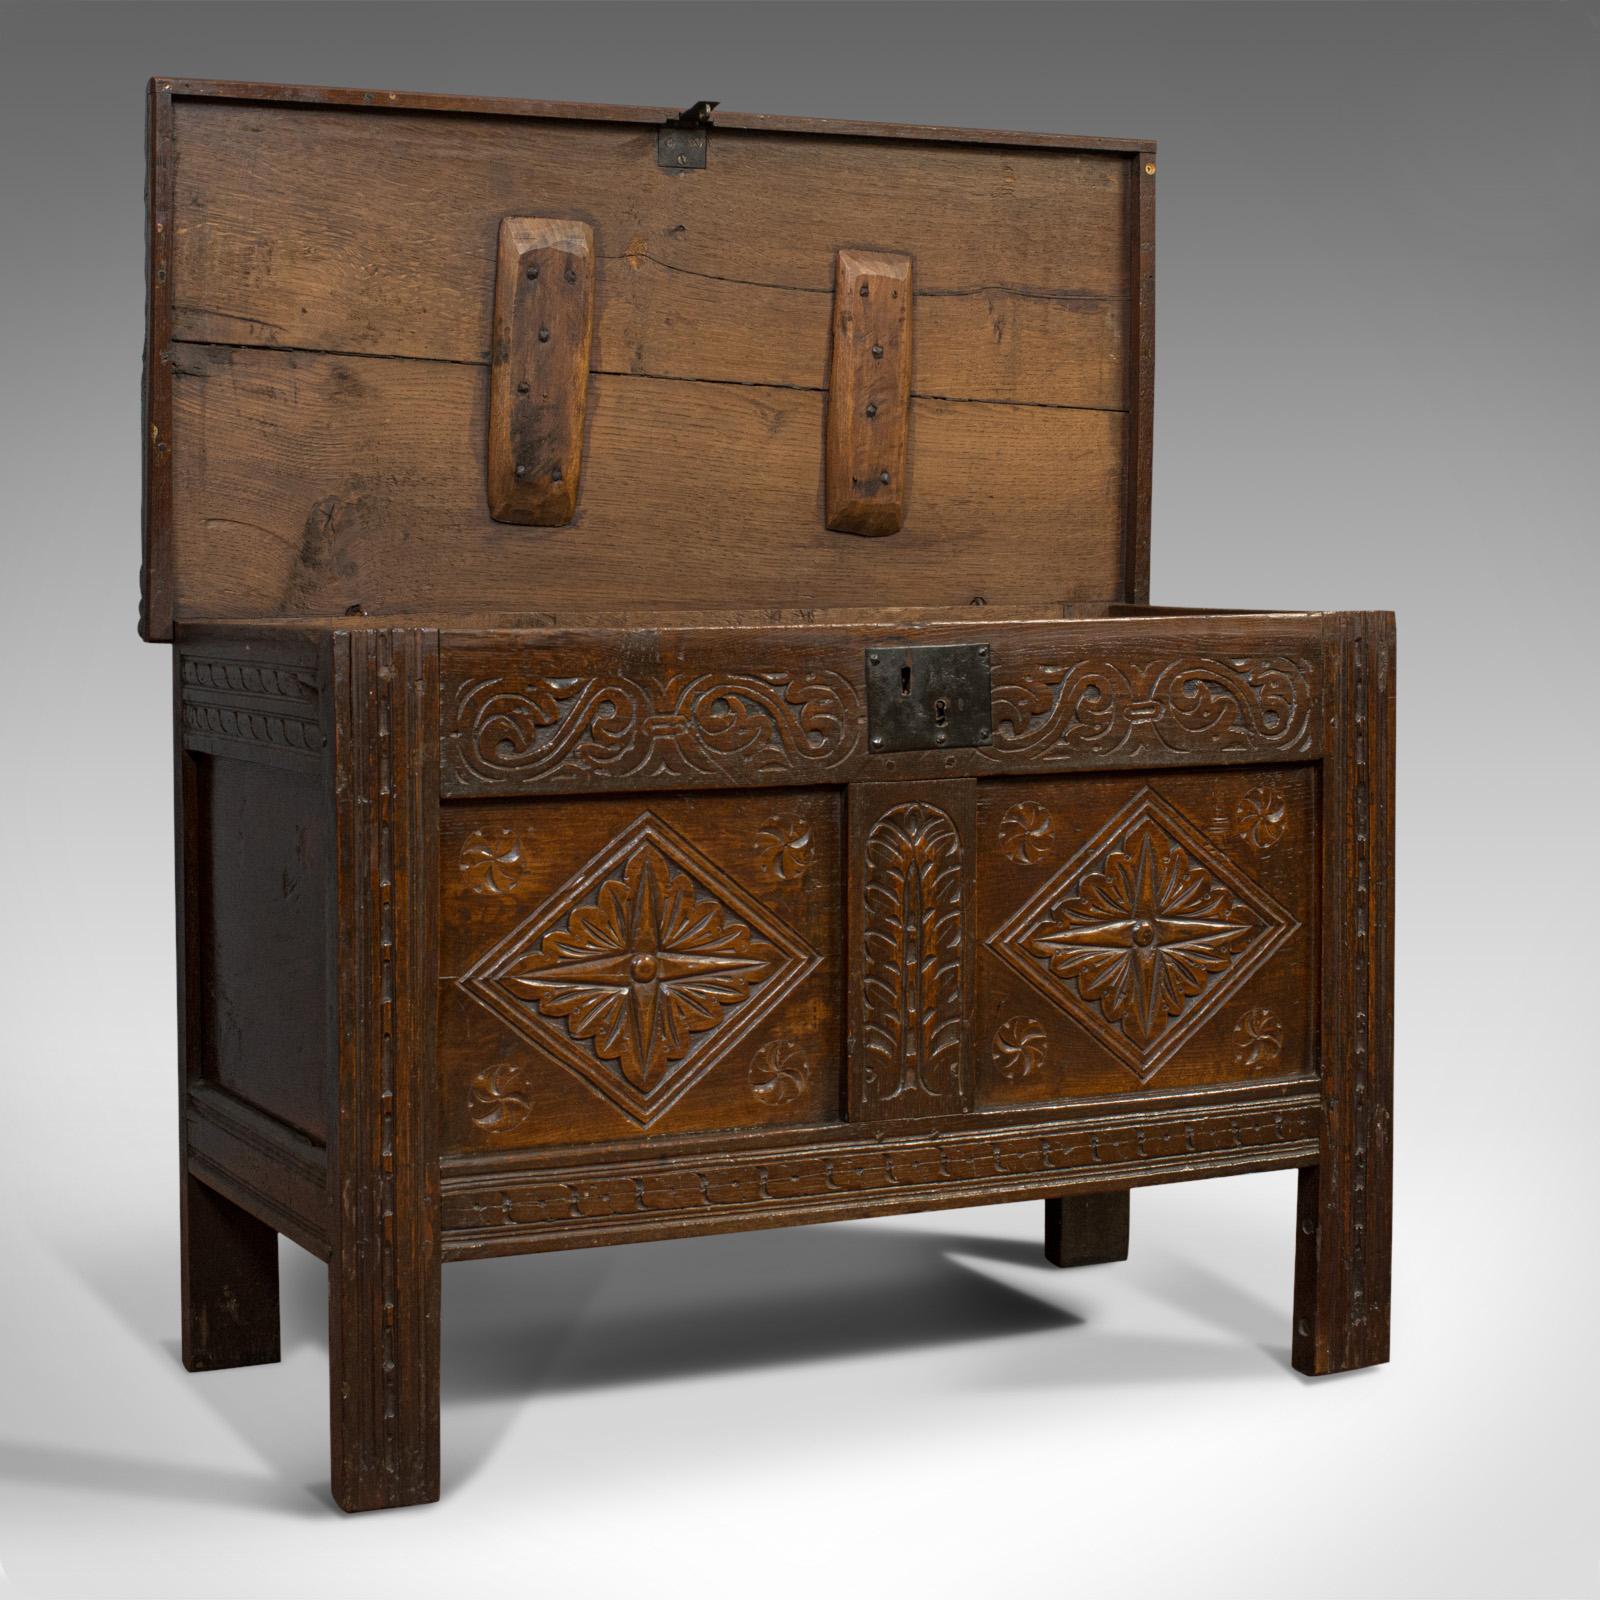 This is a compact antique coffer. An English, oak carved chest or trunk, dating to the early Georgian period, circa 1720.

Superb coffer with fine detail
Displays a desirable aged patina
Highly carved, two panel chest
Select oak with fine grain